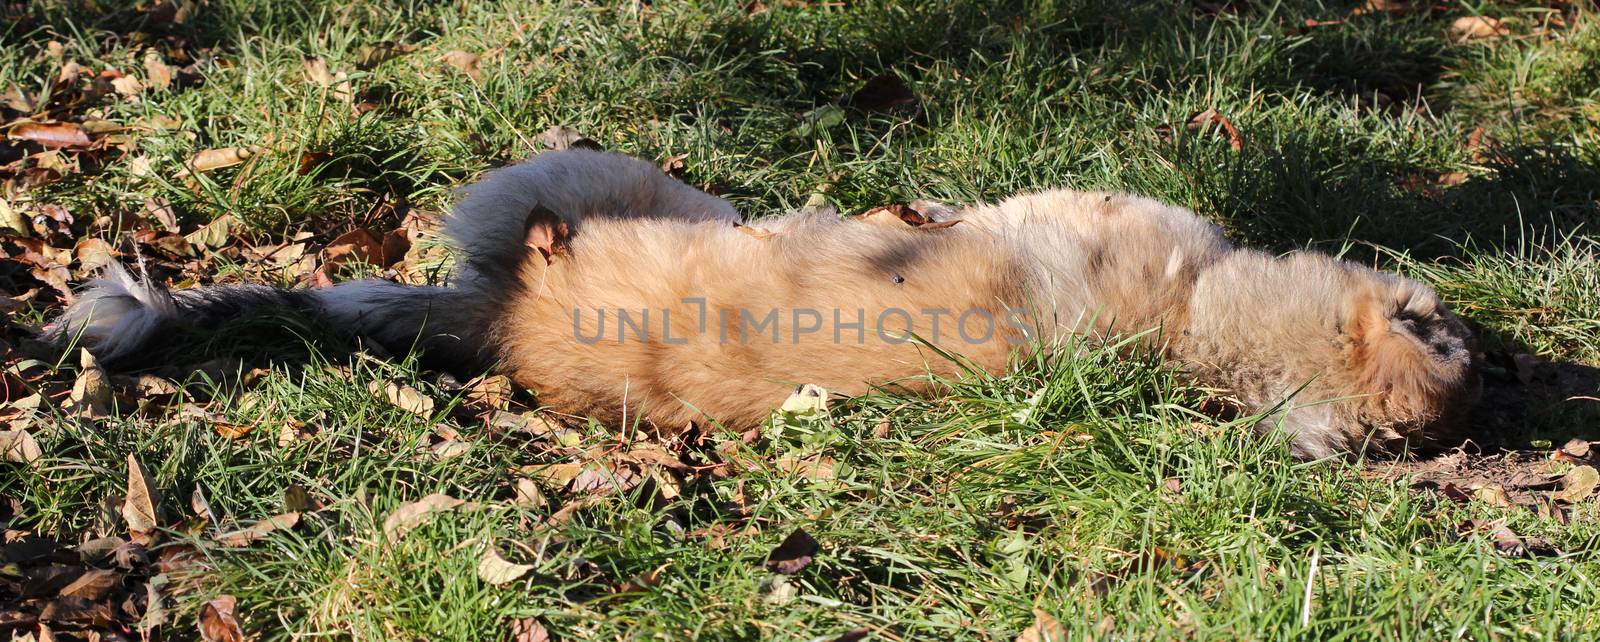 Poisoned dog on a grass in november morning. Save animals concept. by nehru